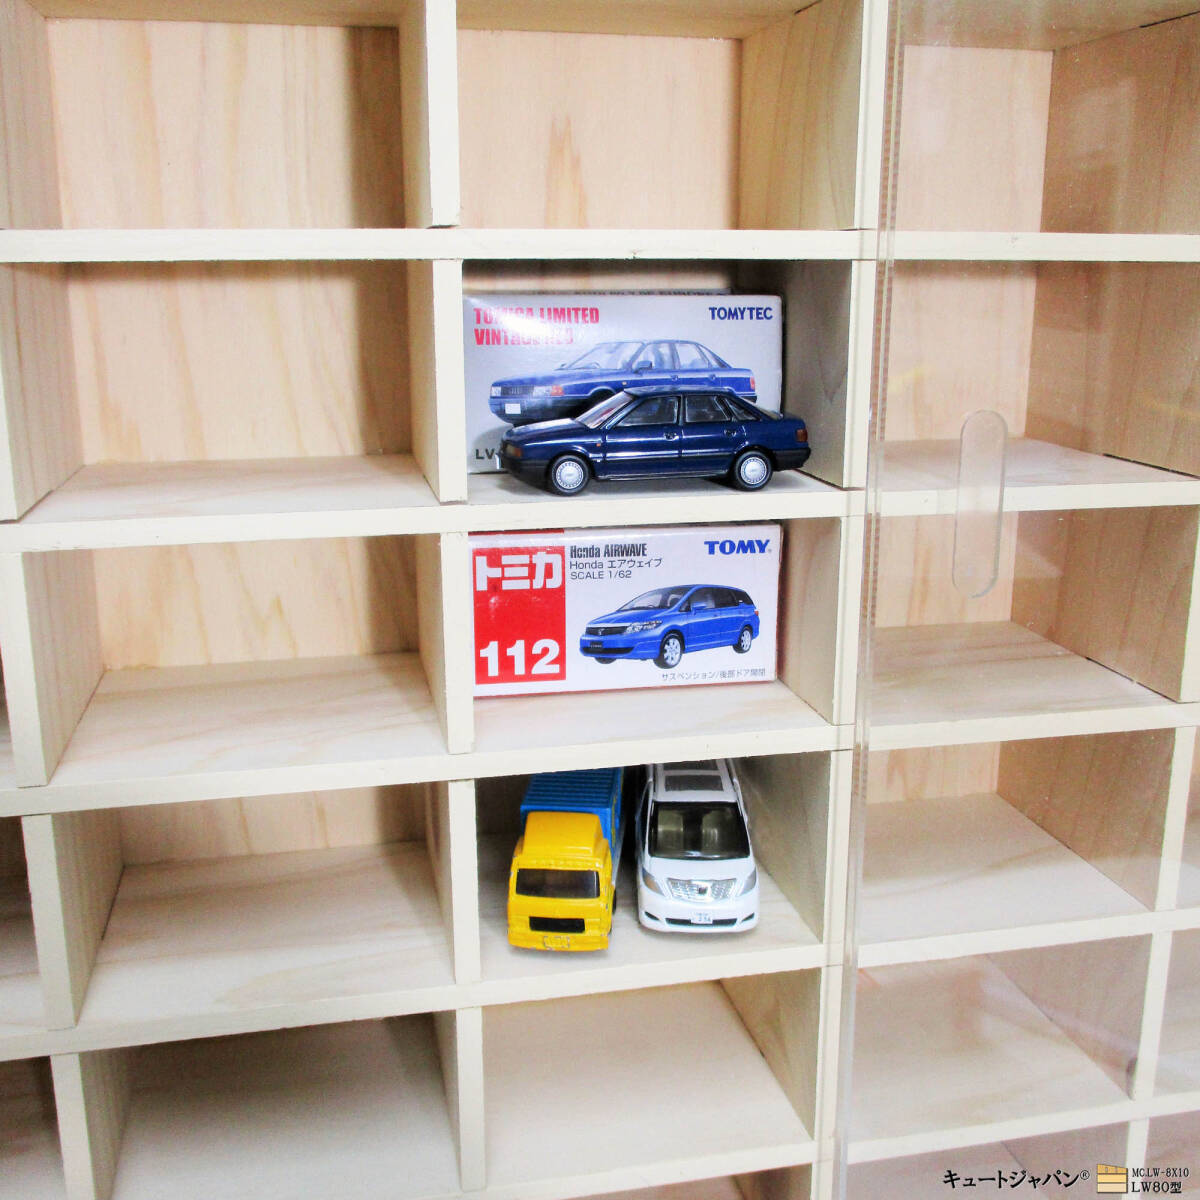 o one-side attaching minicar storage case 160 pcs acrylic fiber shoji attaching made in Japan new goods display Tomica case collection [ free shipping ]